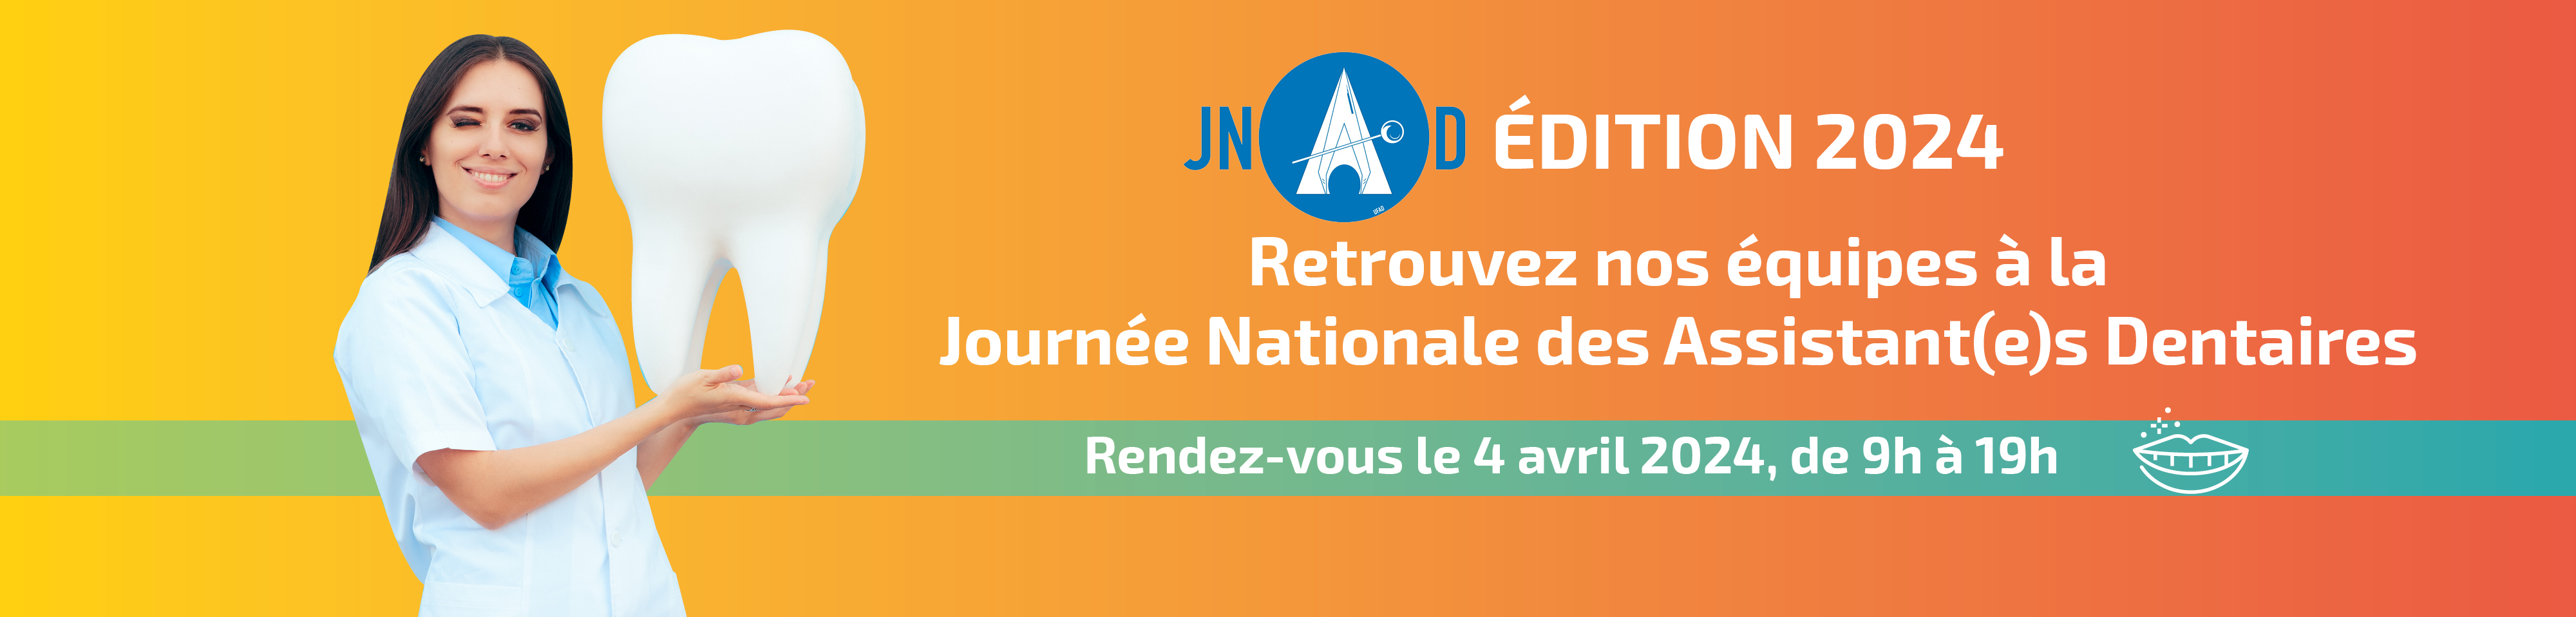 JNAD Promodentaire